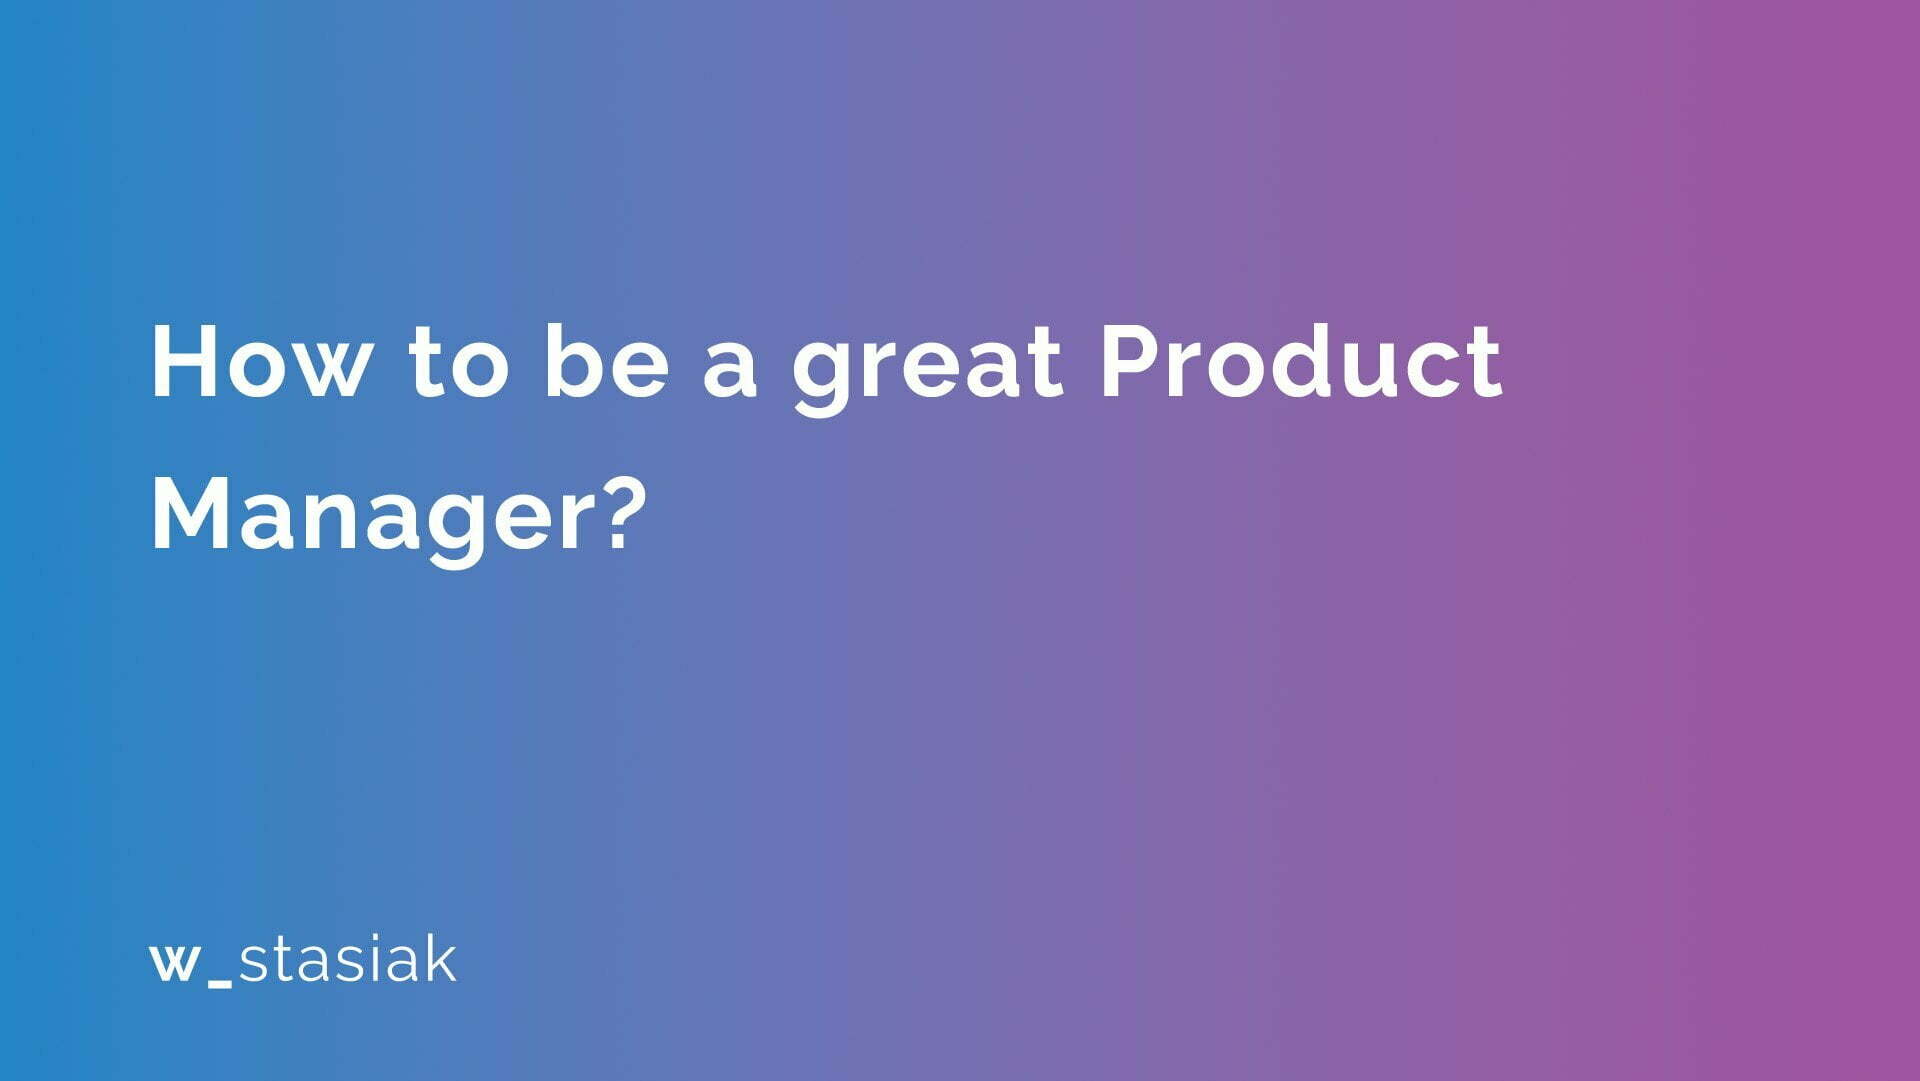 How to be a great Product Manager - ws